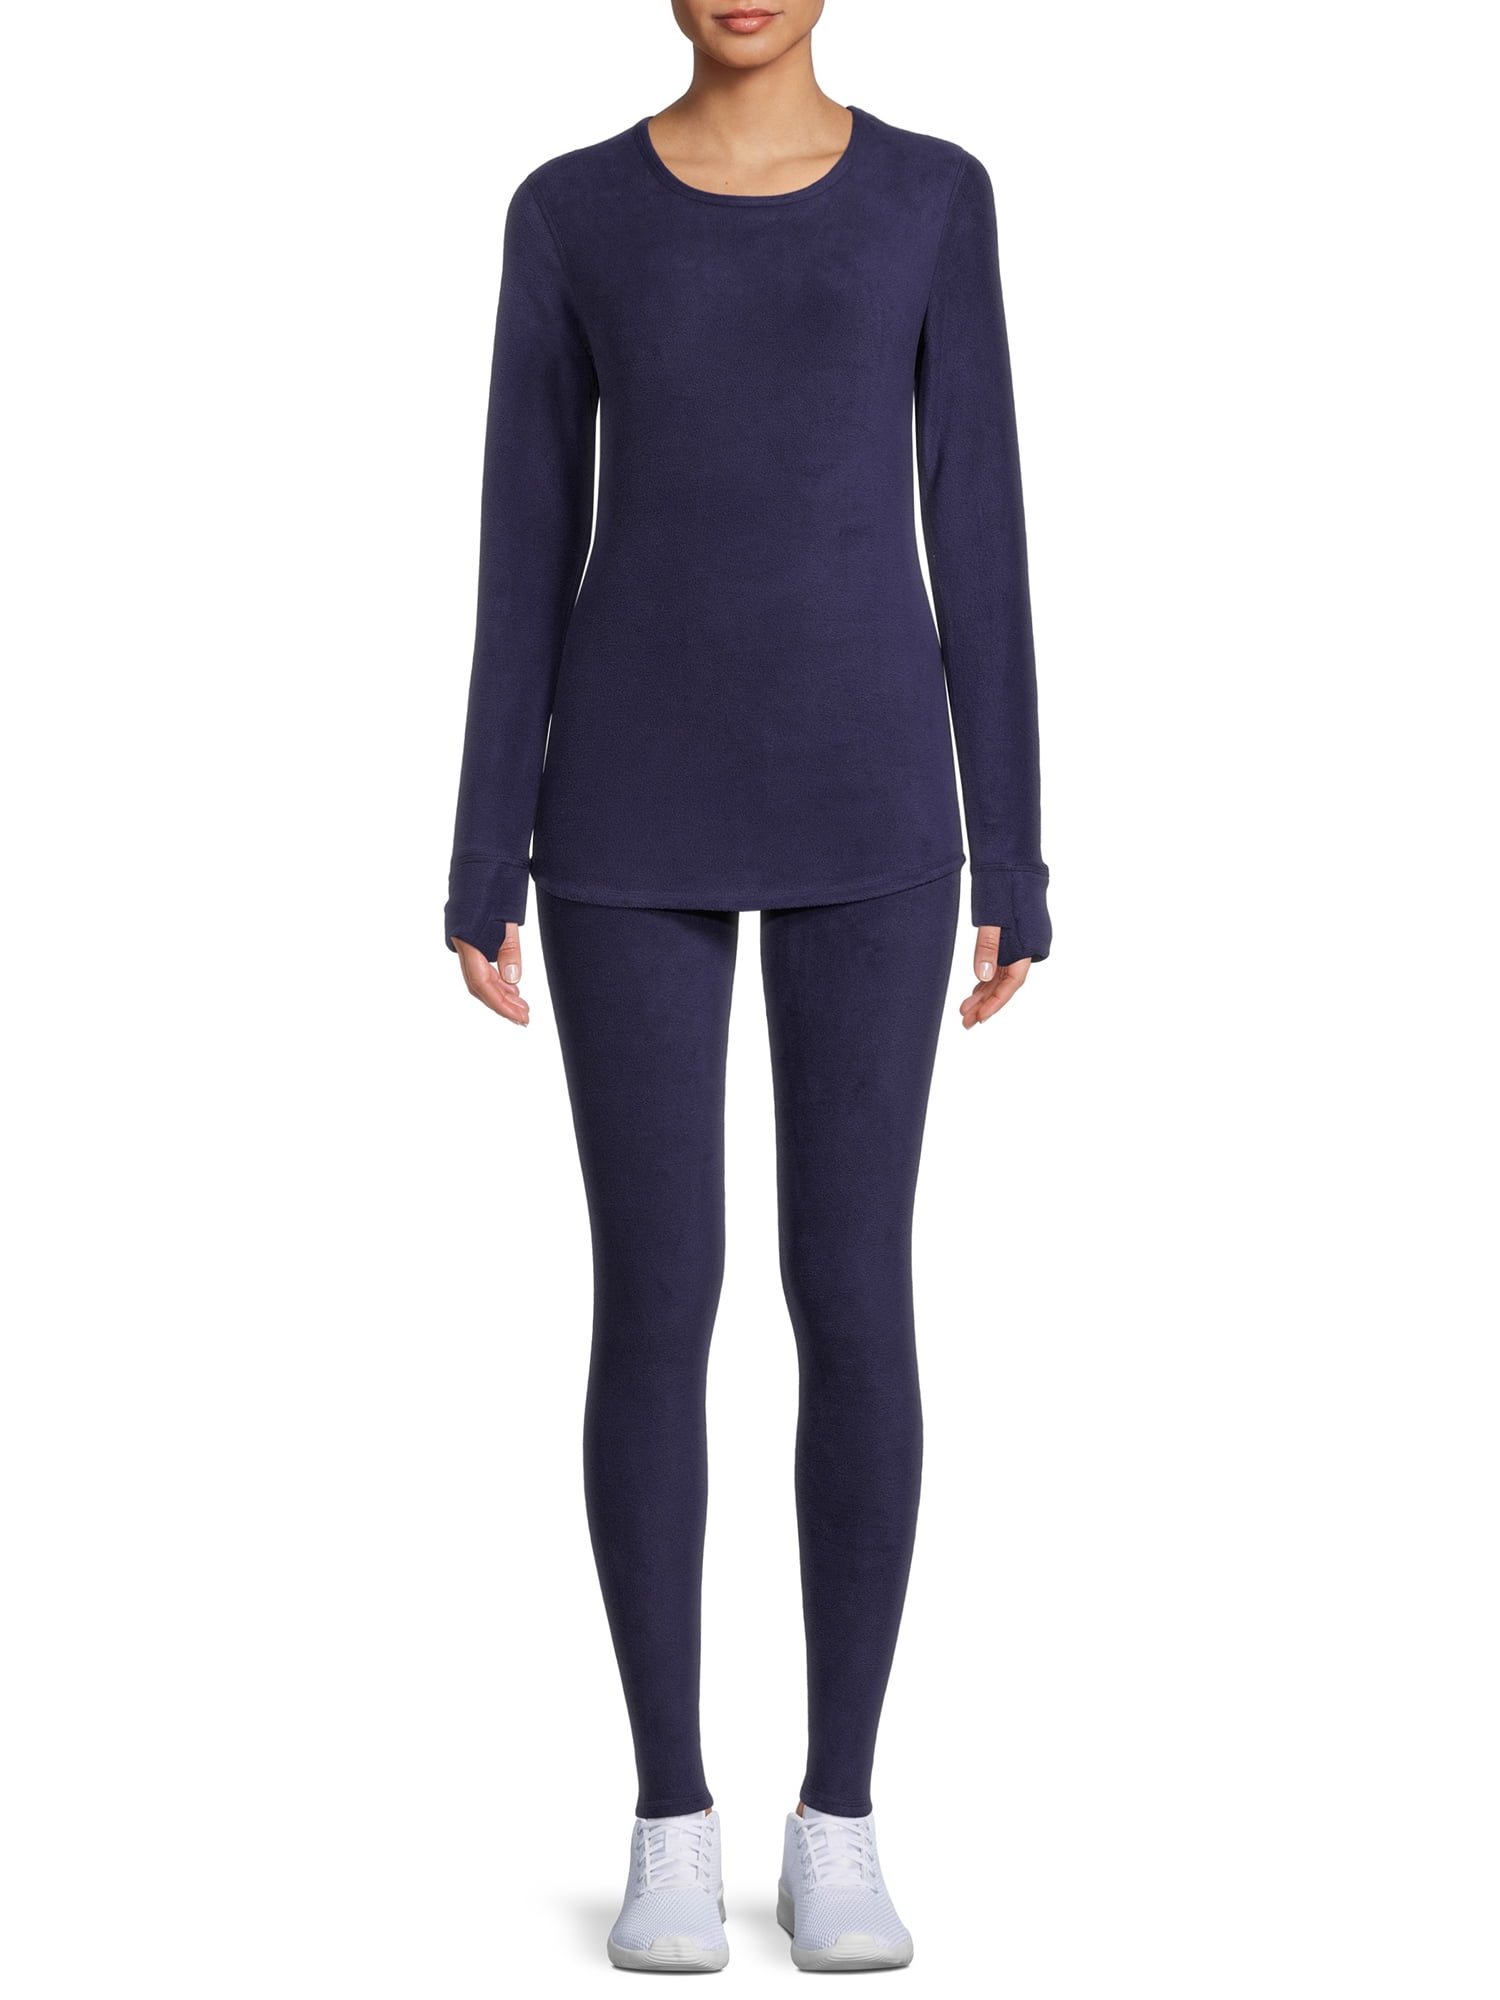 ClimateRight by Cuddl Duds Women's Stretch Fleece Long Sleeve Crew Neck Top  & Legging Base Layer Set, Sizes XS to 4XL 